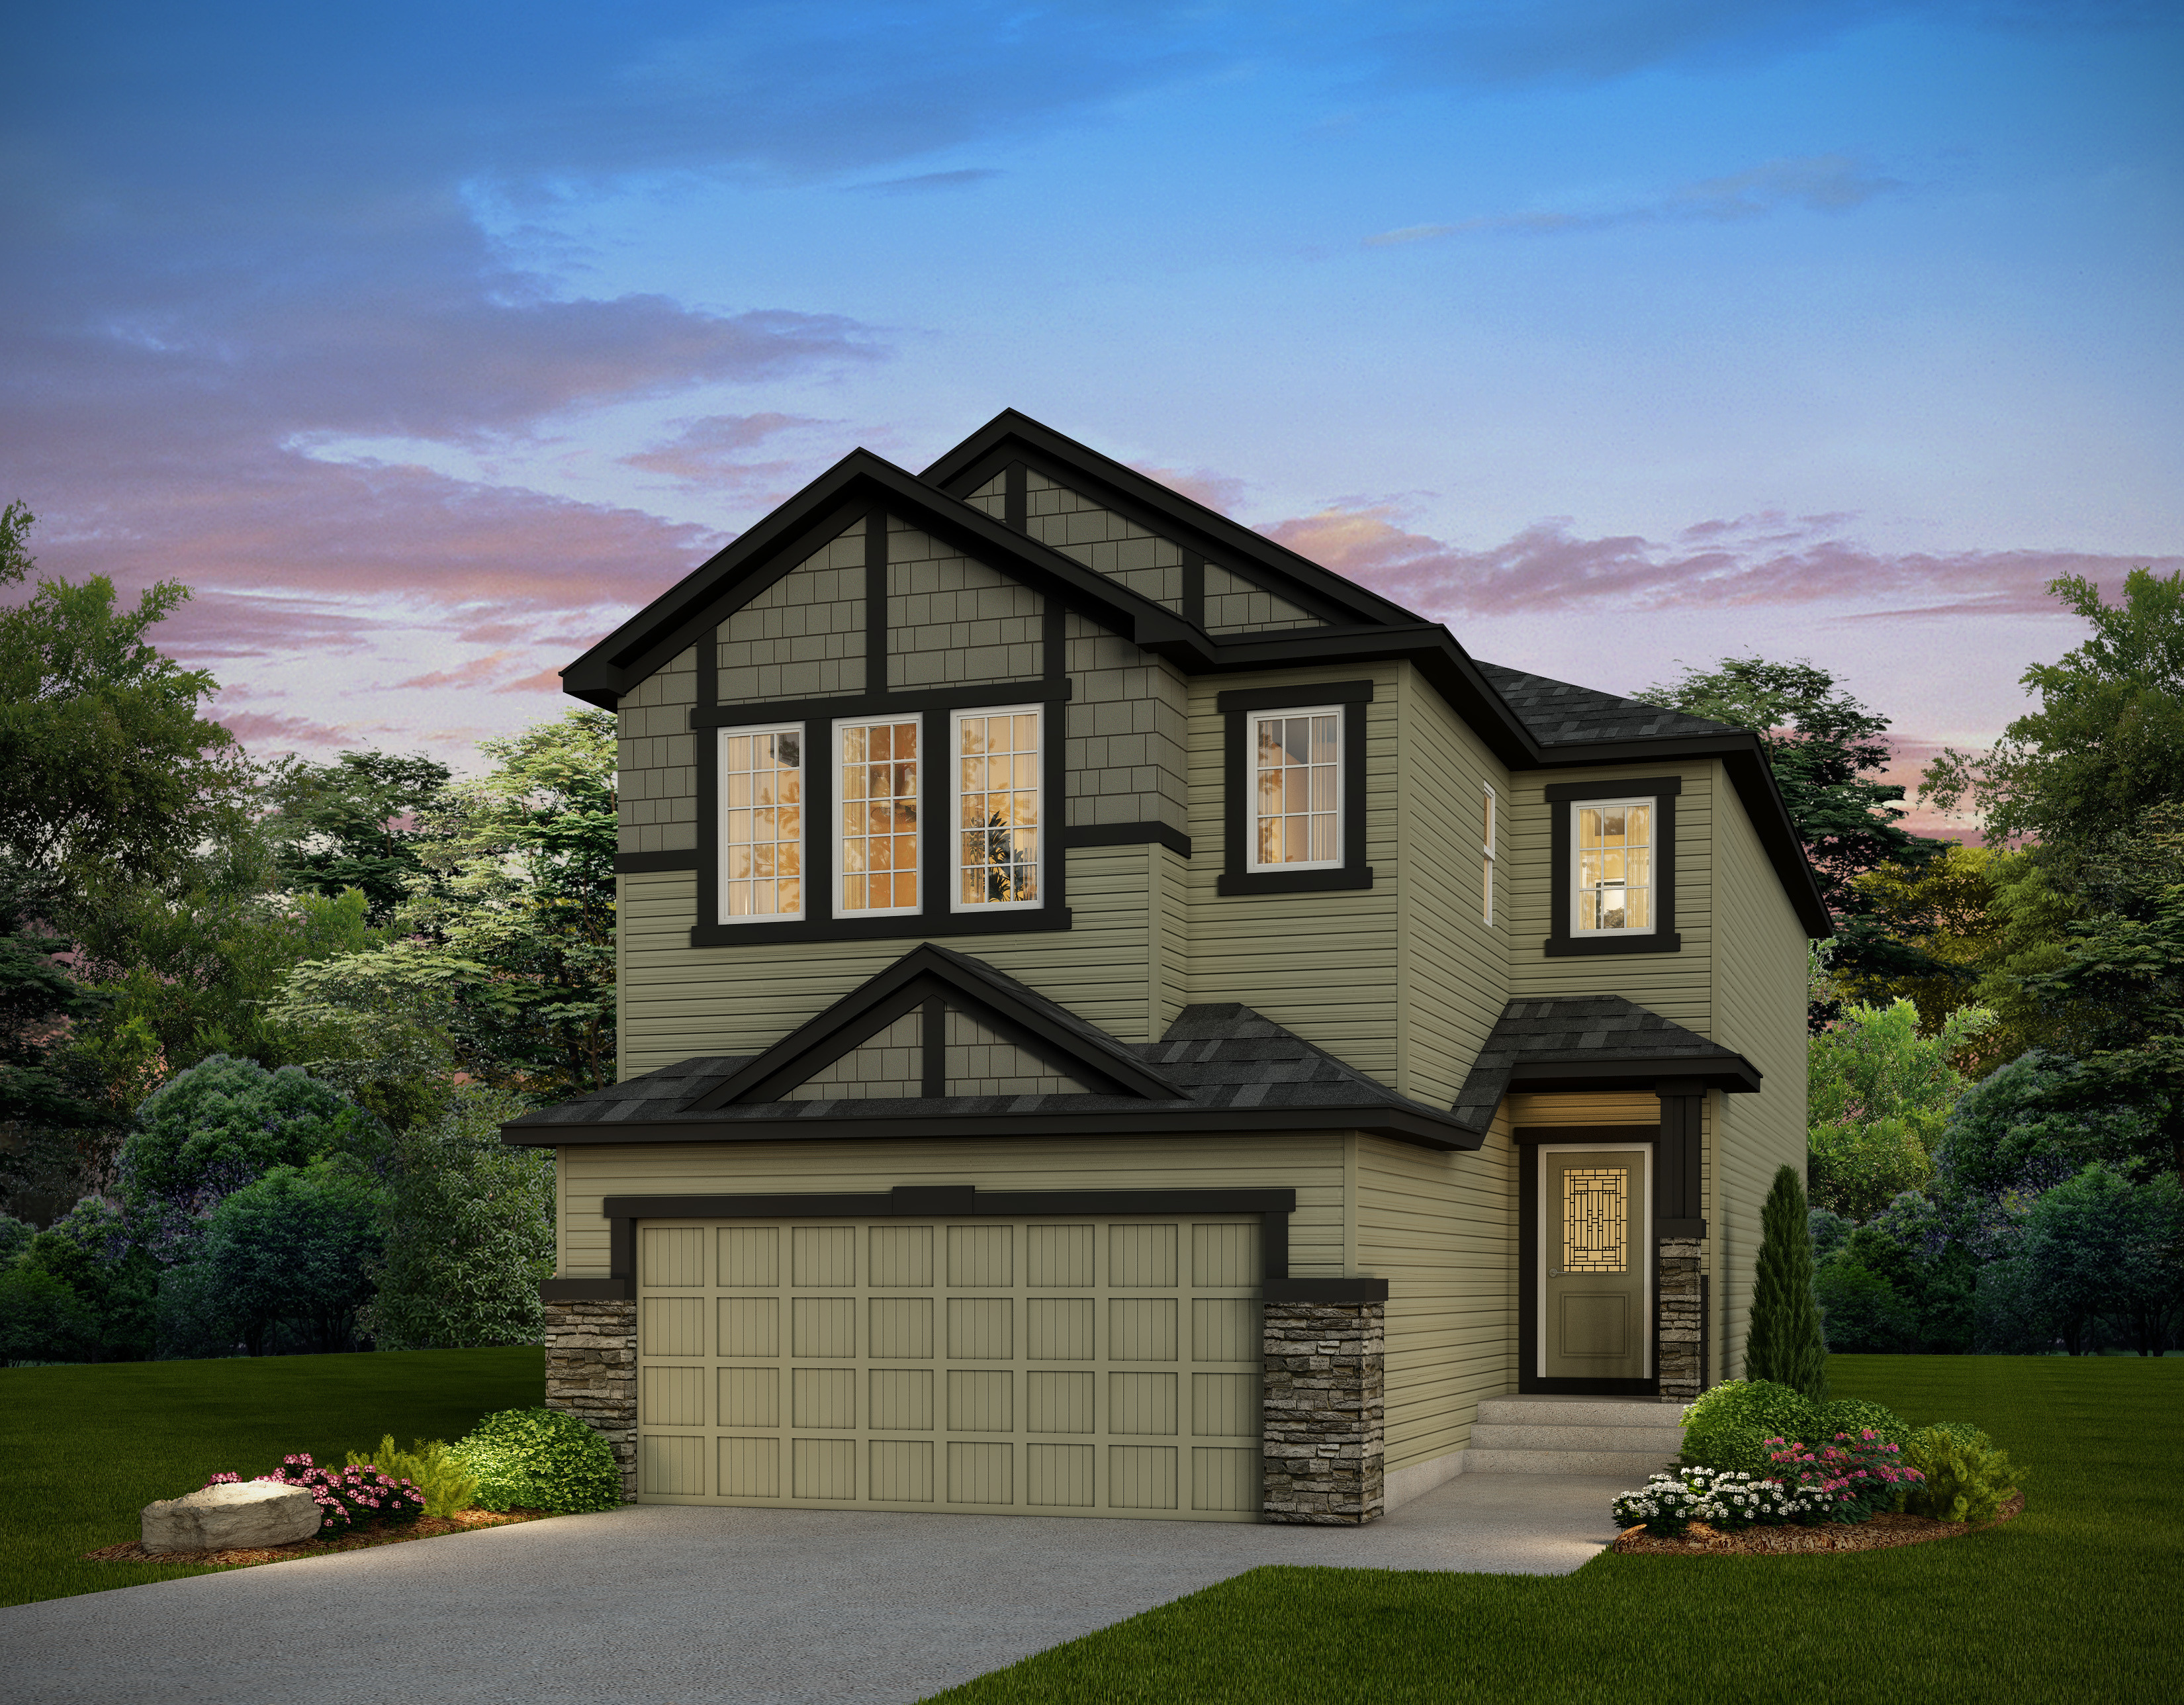 #802604 - Crestmont New 4br, 2.5bath Home -Residential Detached-Calgary